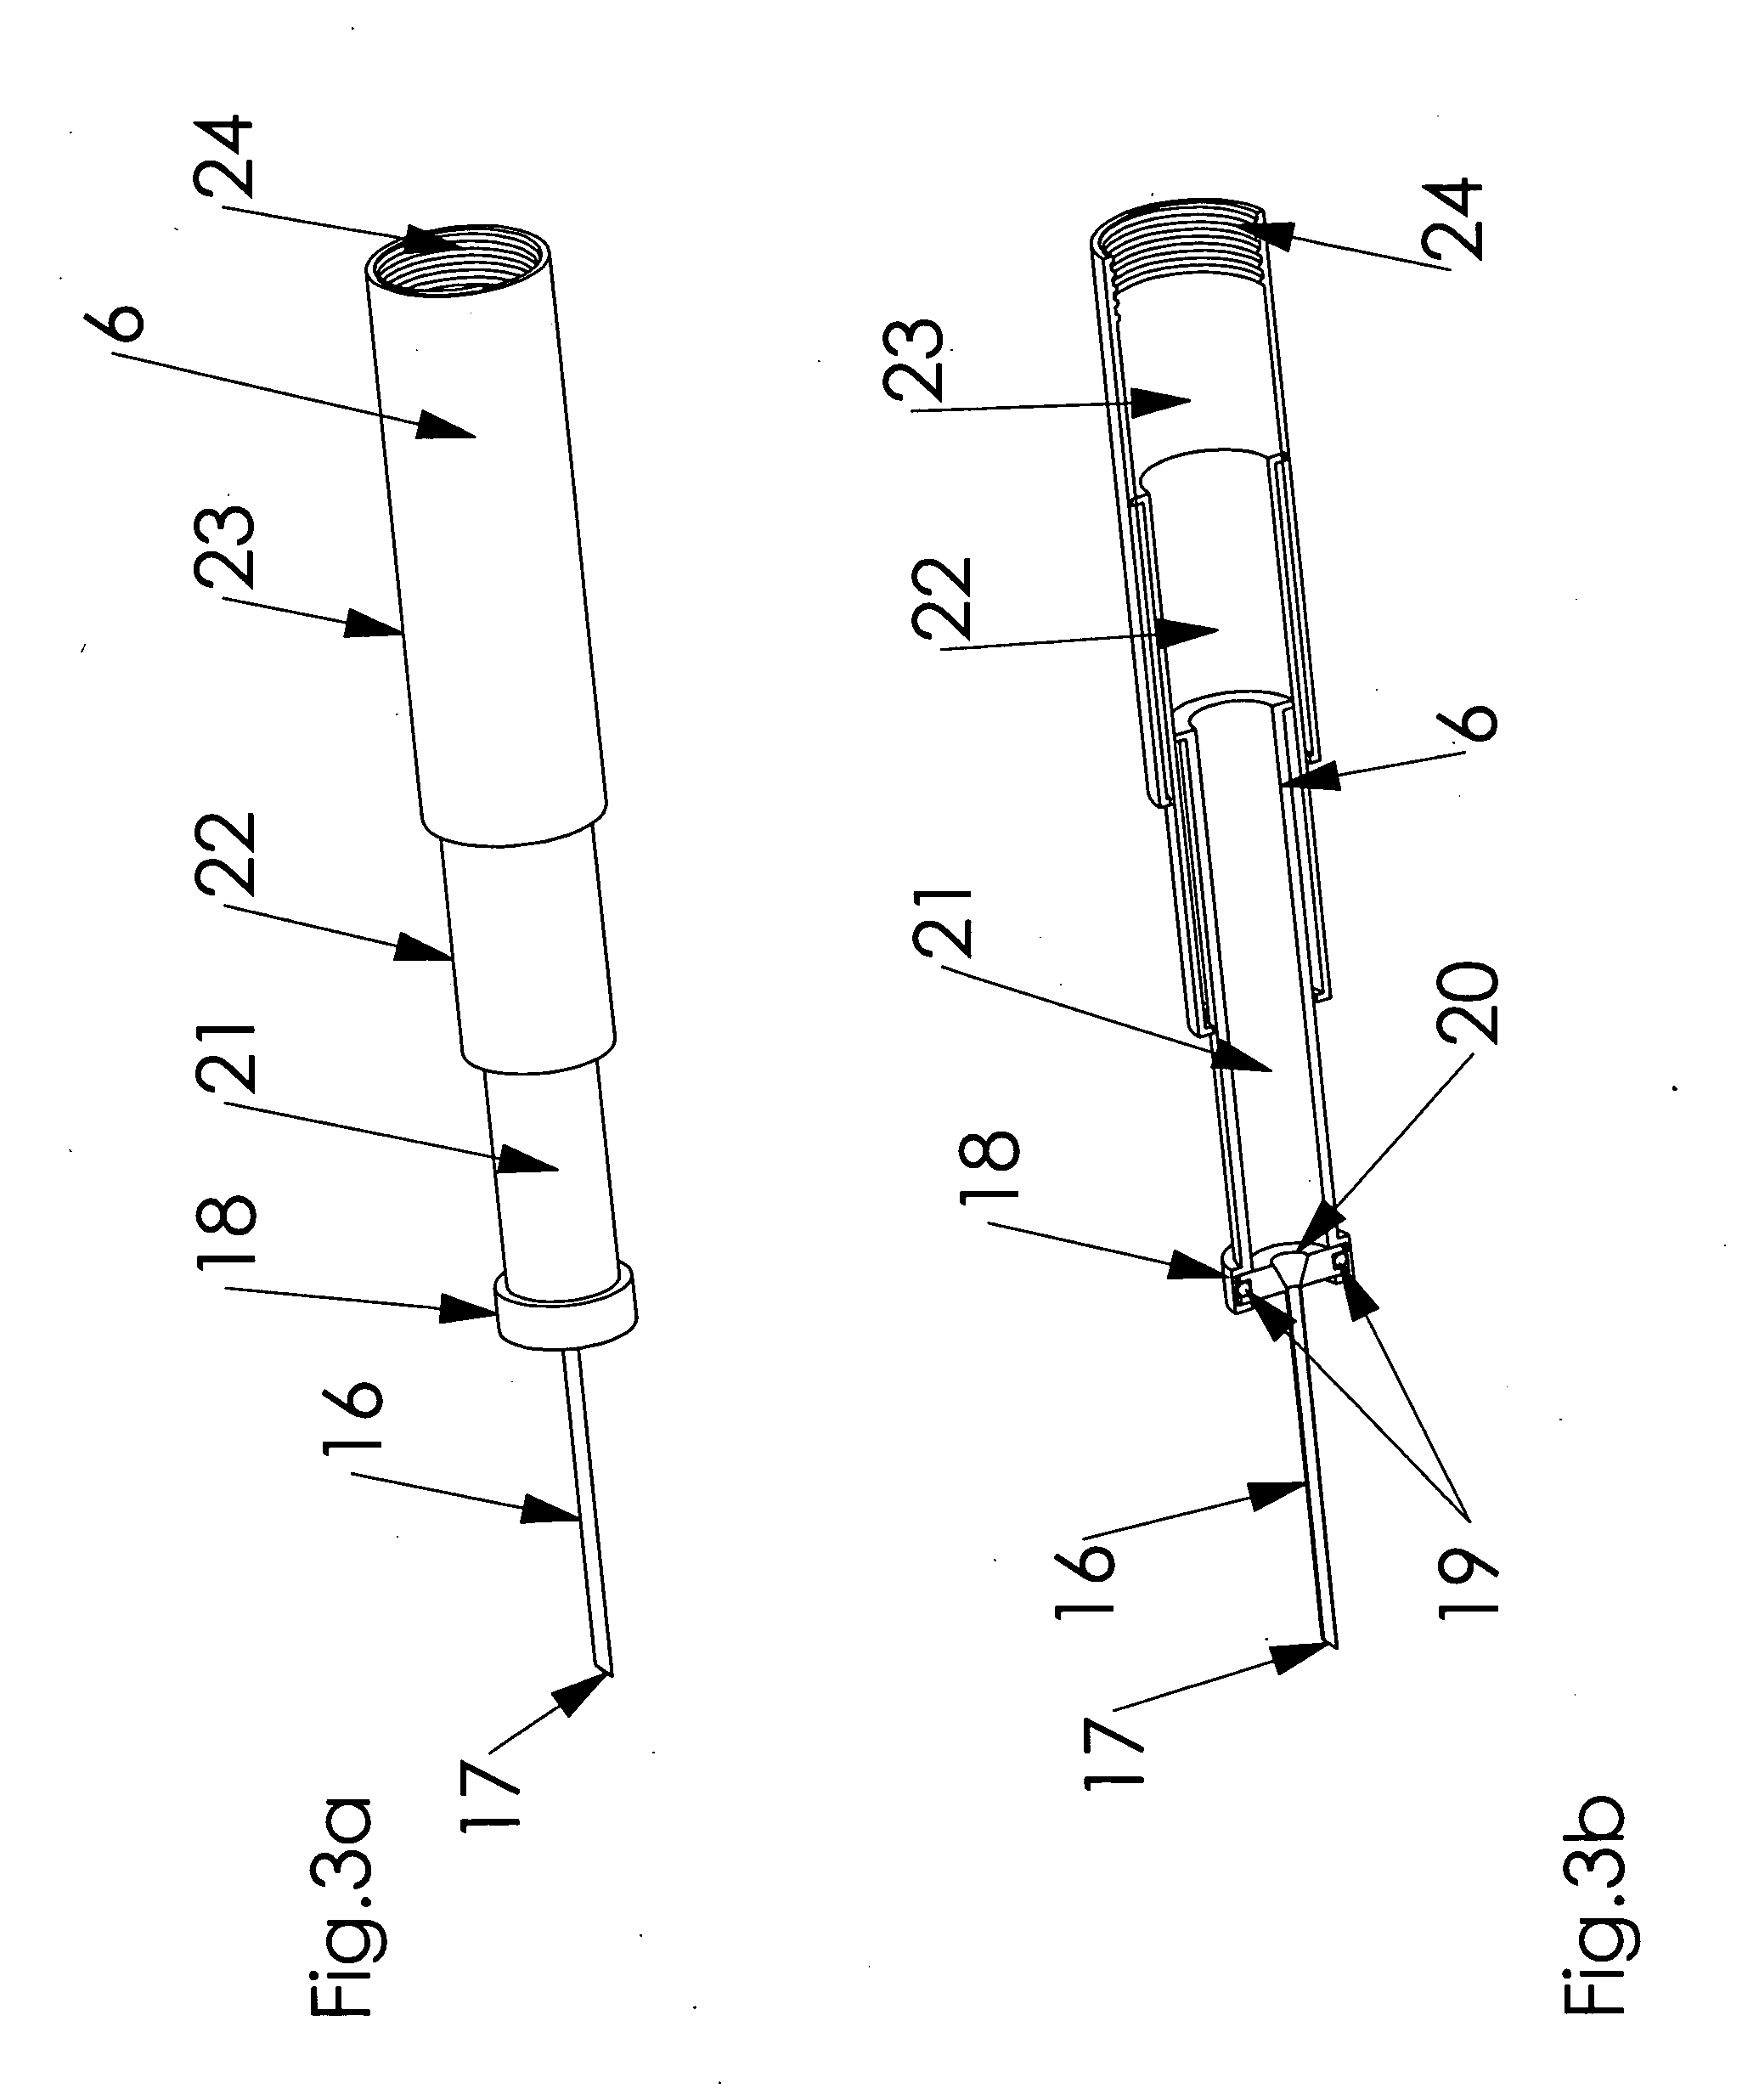 Multi-Purpose Minimally Invasive Instrument That Uses a Micro Entry Port